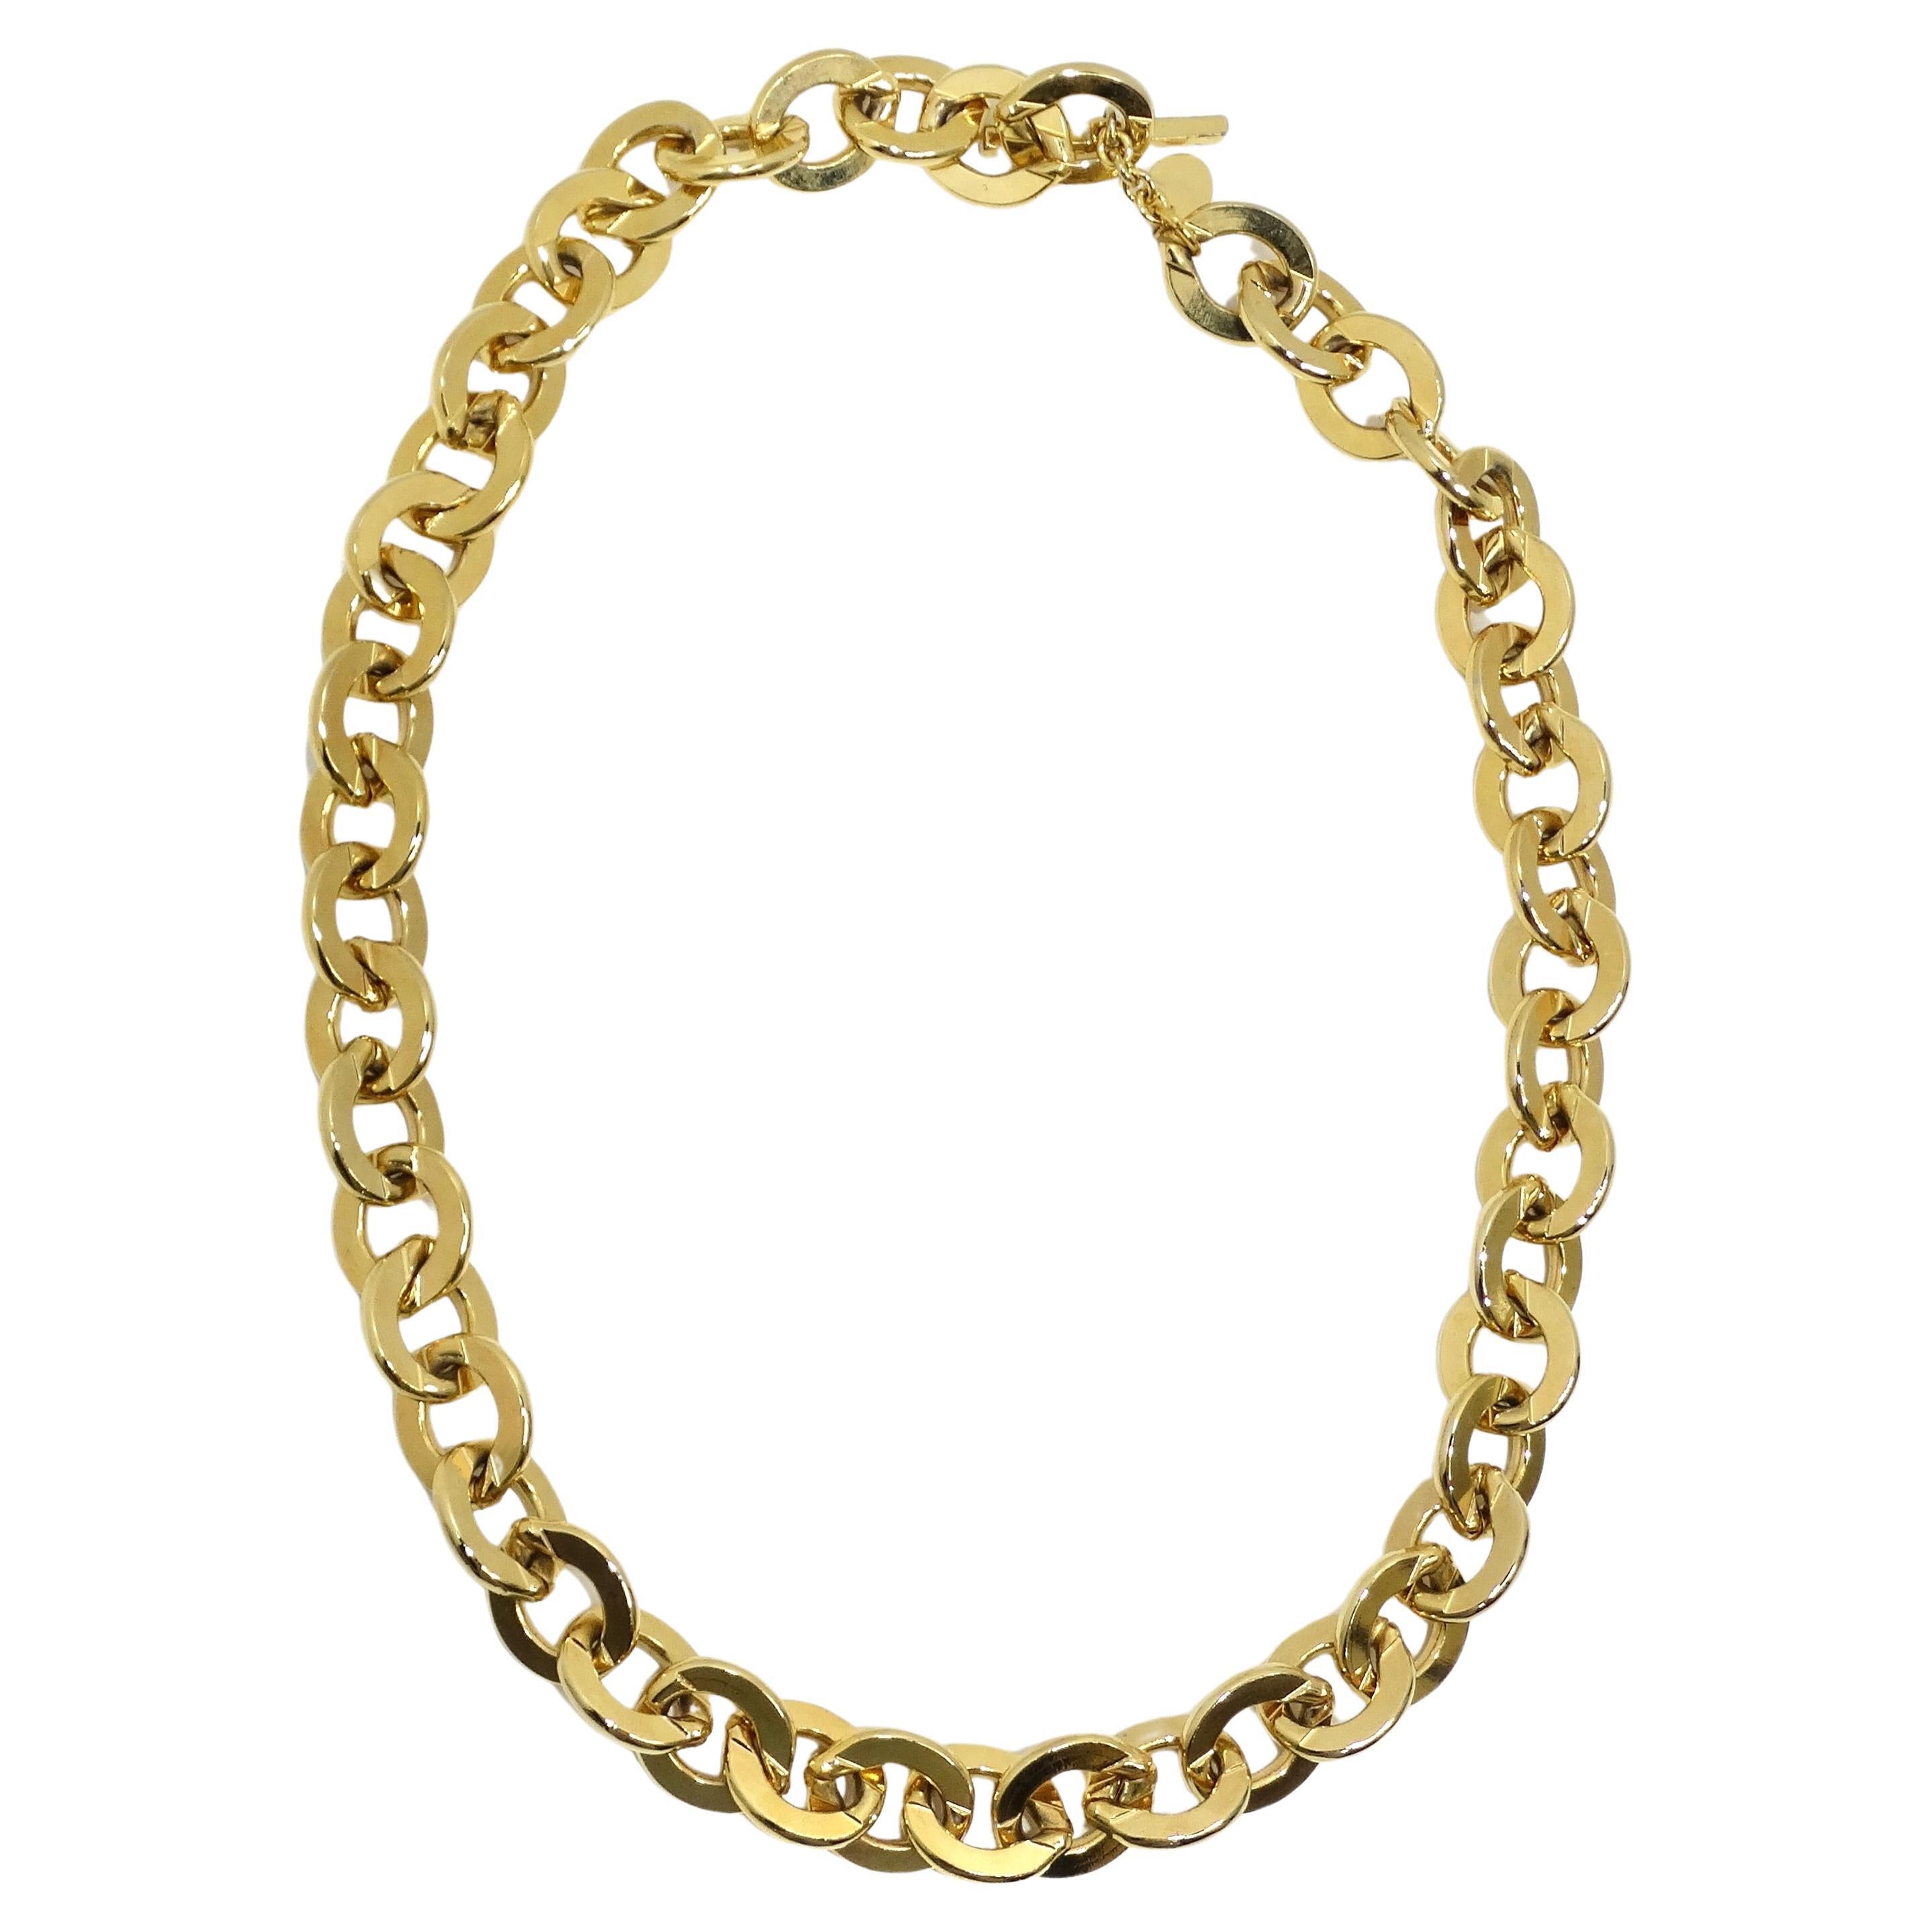 Erwin Pearl 1980s Gold Tone Chain Necklace For Sale